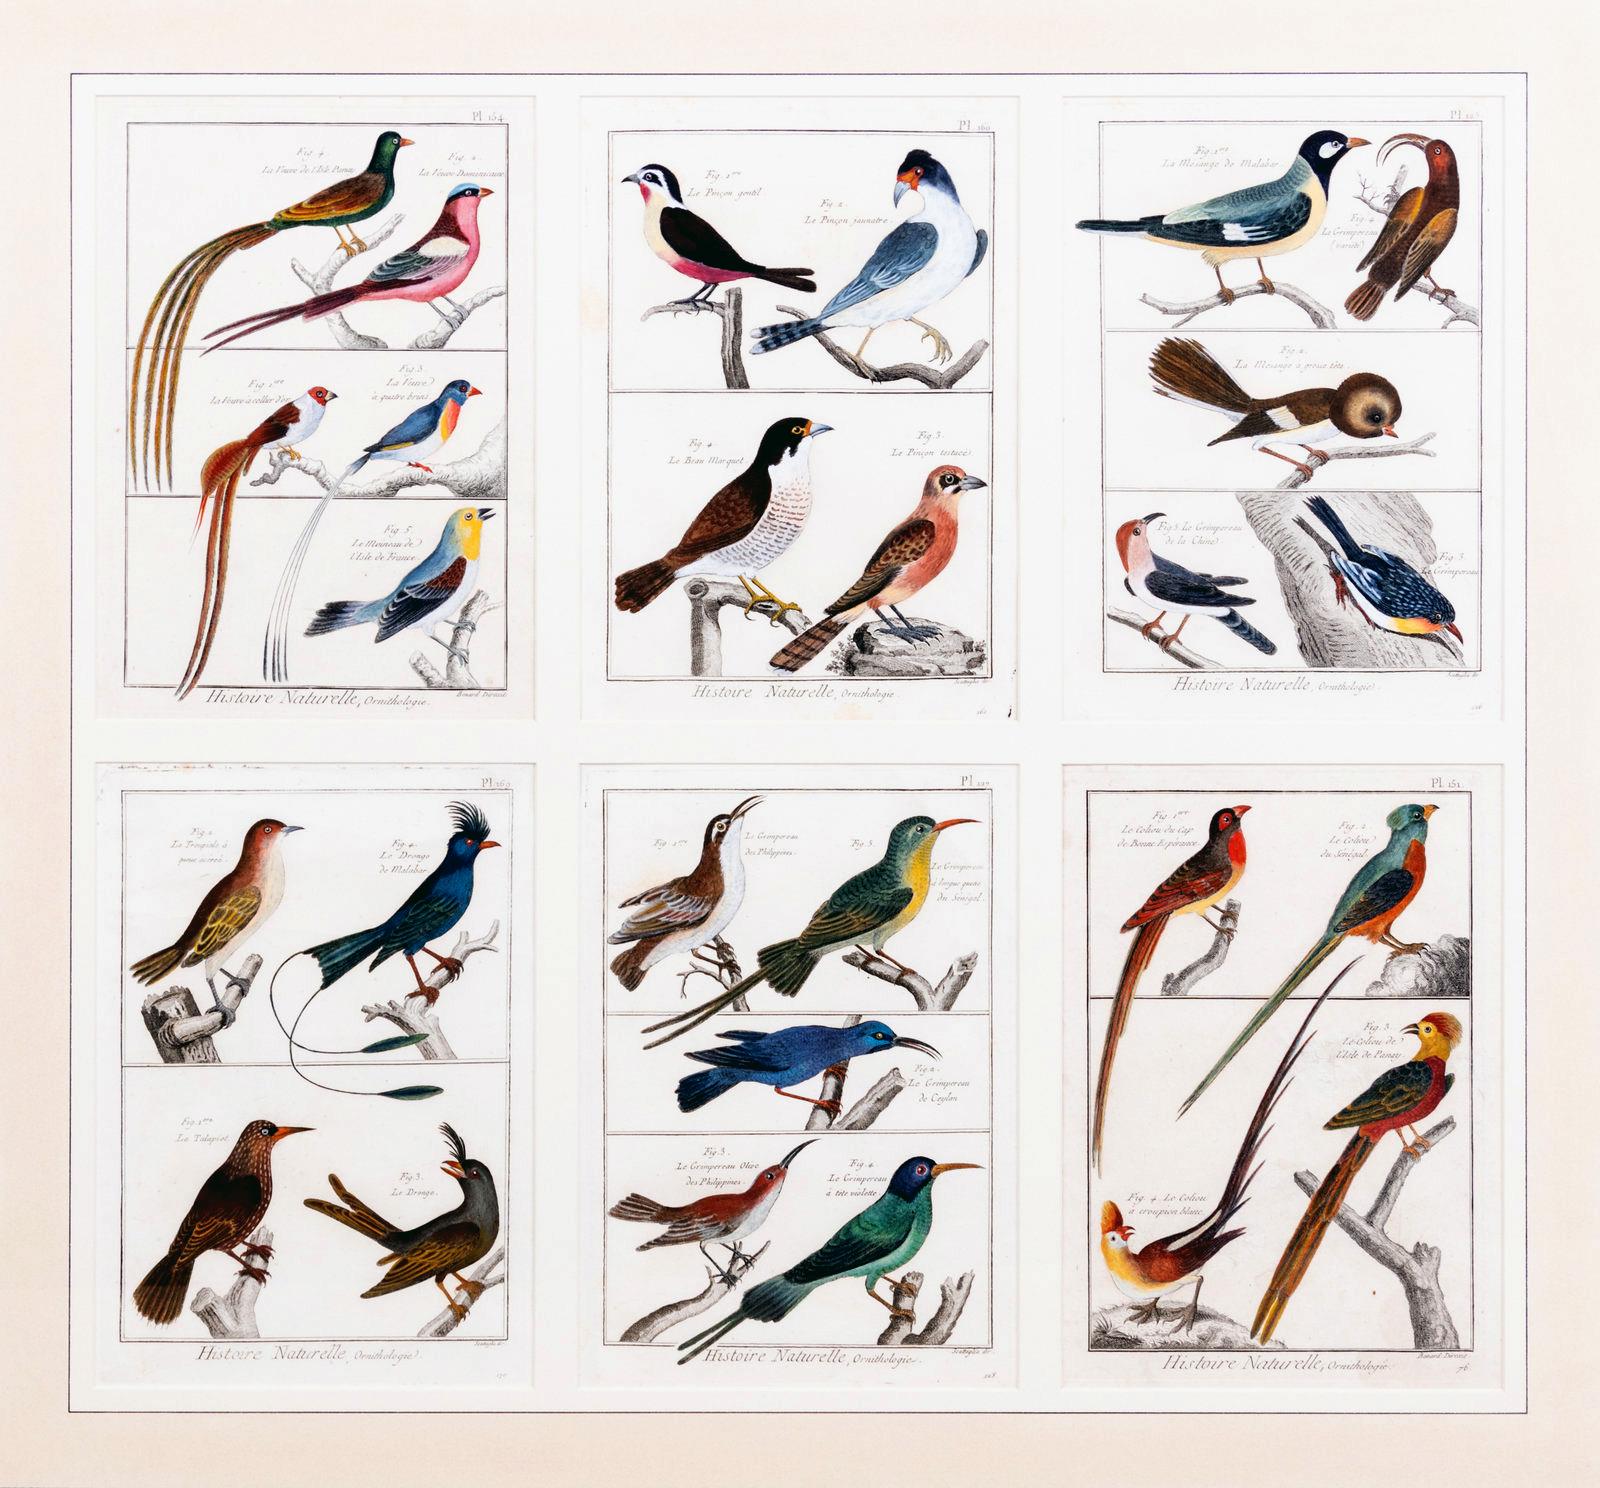 Large Picture containing Six Different Engravings of Grouping of Birds,
Histoire Naturelle, Ornithologie by Georges-Louis Leclerc, Comte de Buffon,
Circa 1770-83

The large picture contains six different engravings of a grouping of birds from